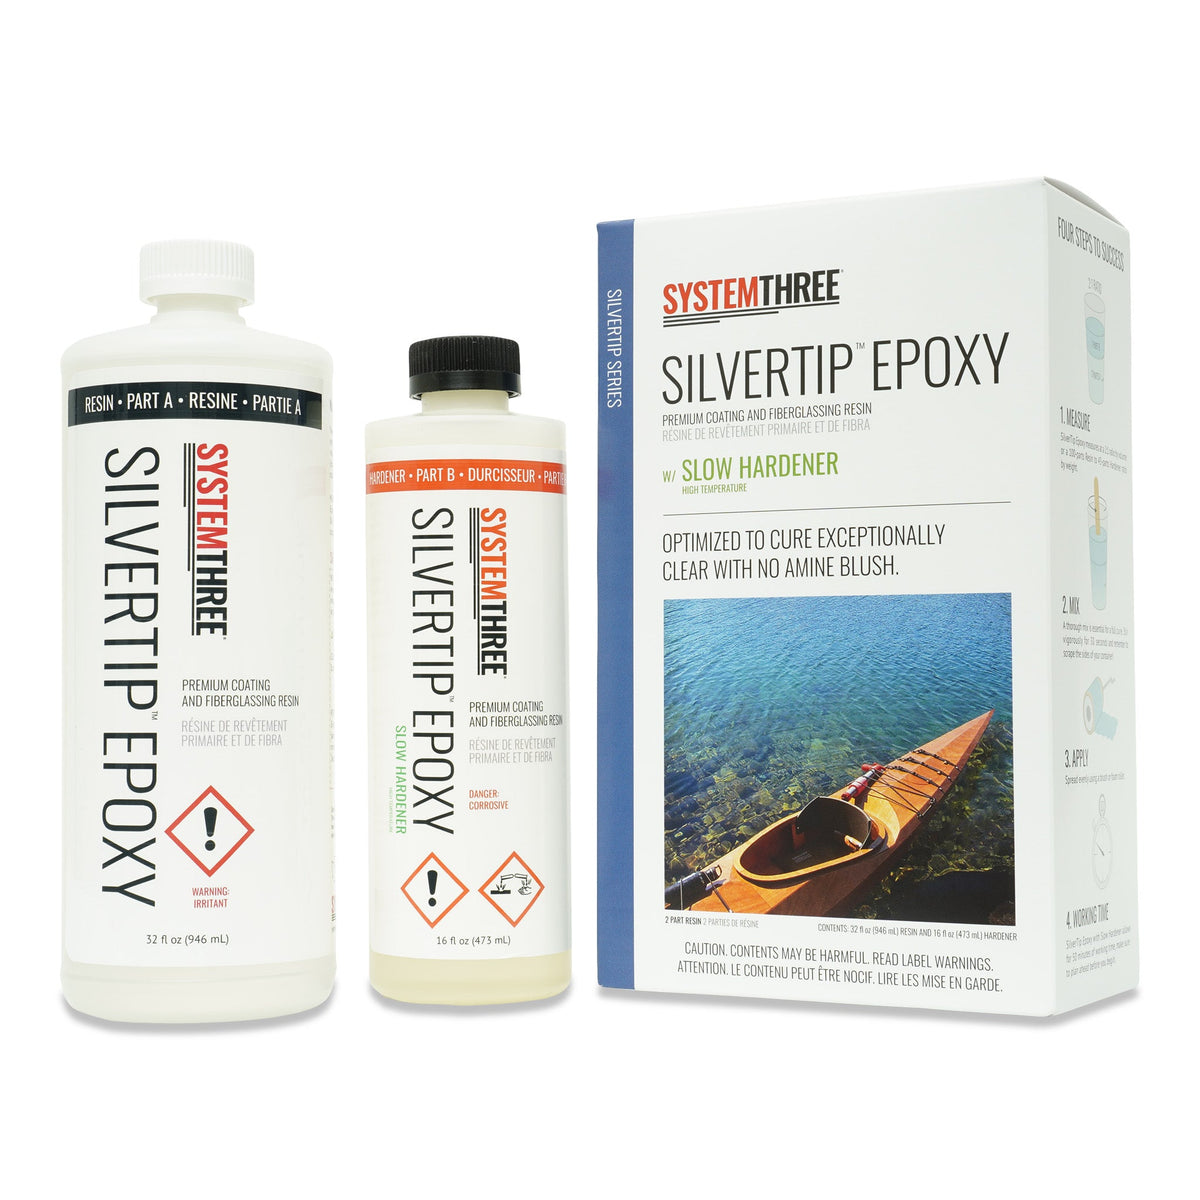 System Three 0901K46 Silvertip Epoxy Kit with Slow Hardener, 1.5 Gallon, Clear